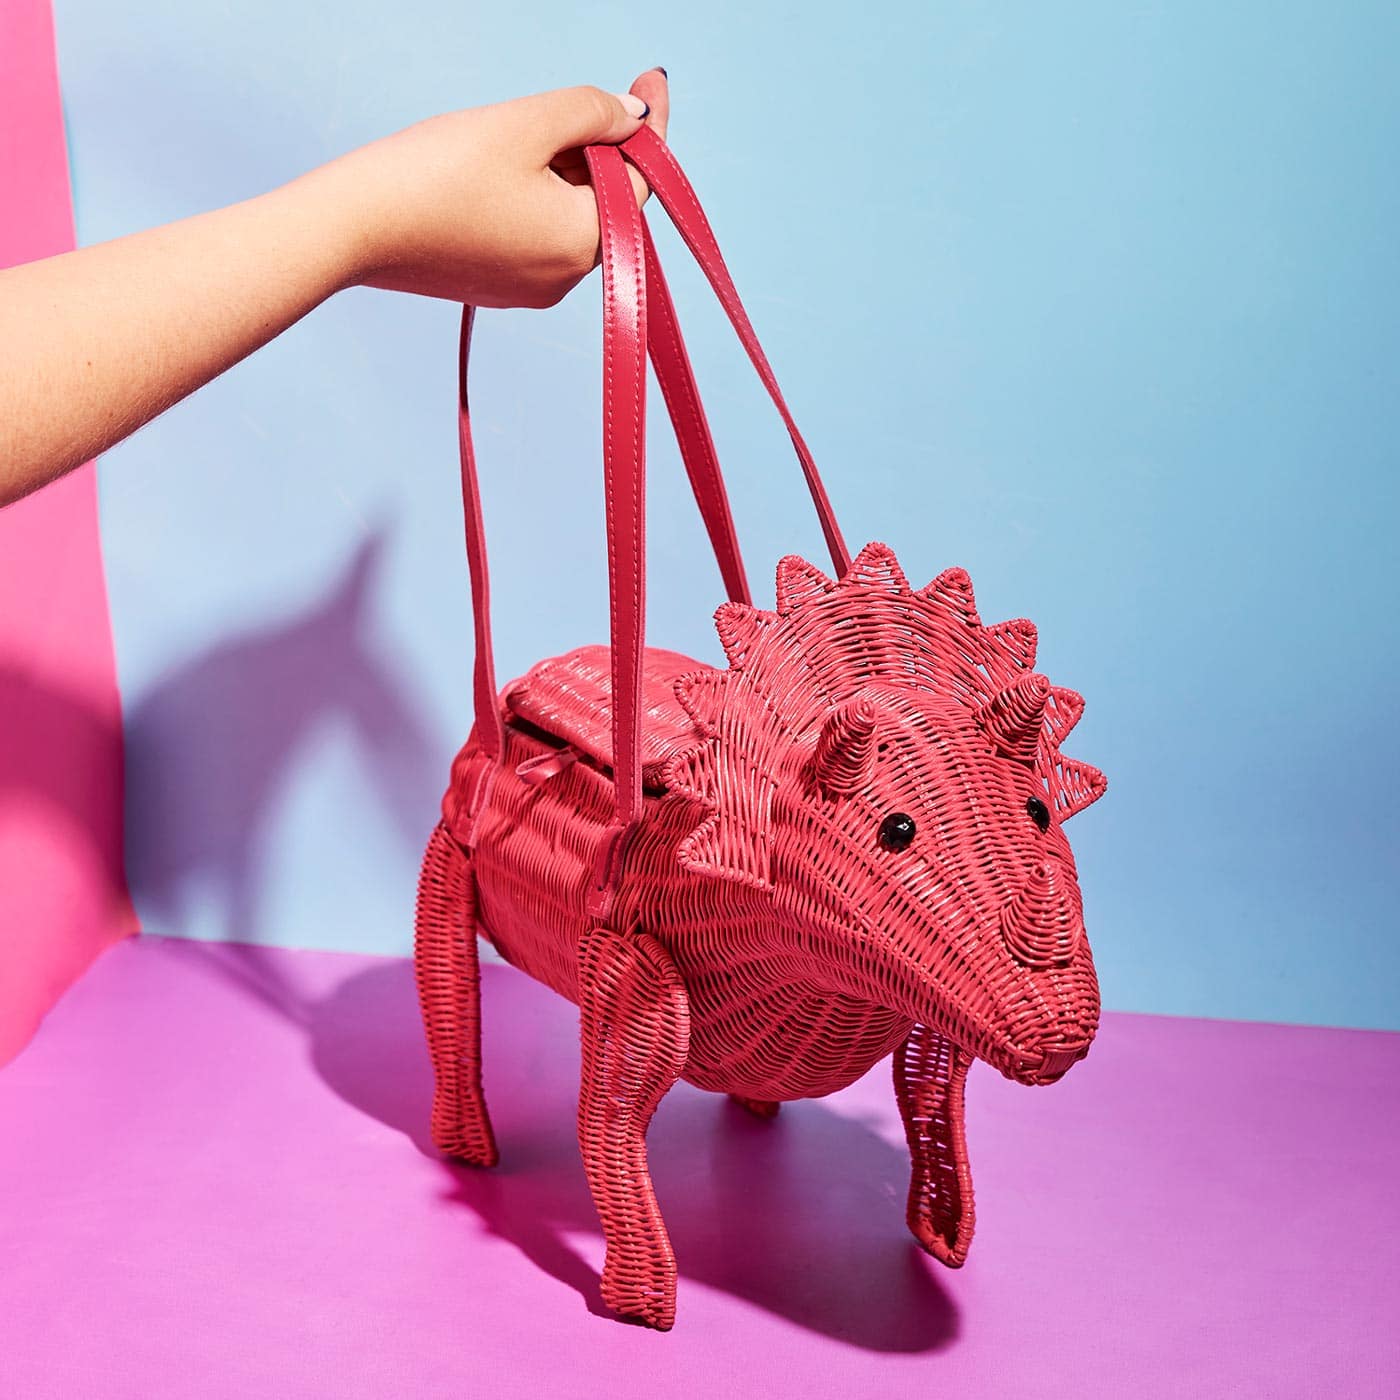 Wicker Darling's Joan the pink triceratops purse on a colourful background